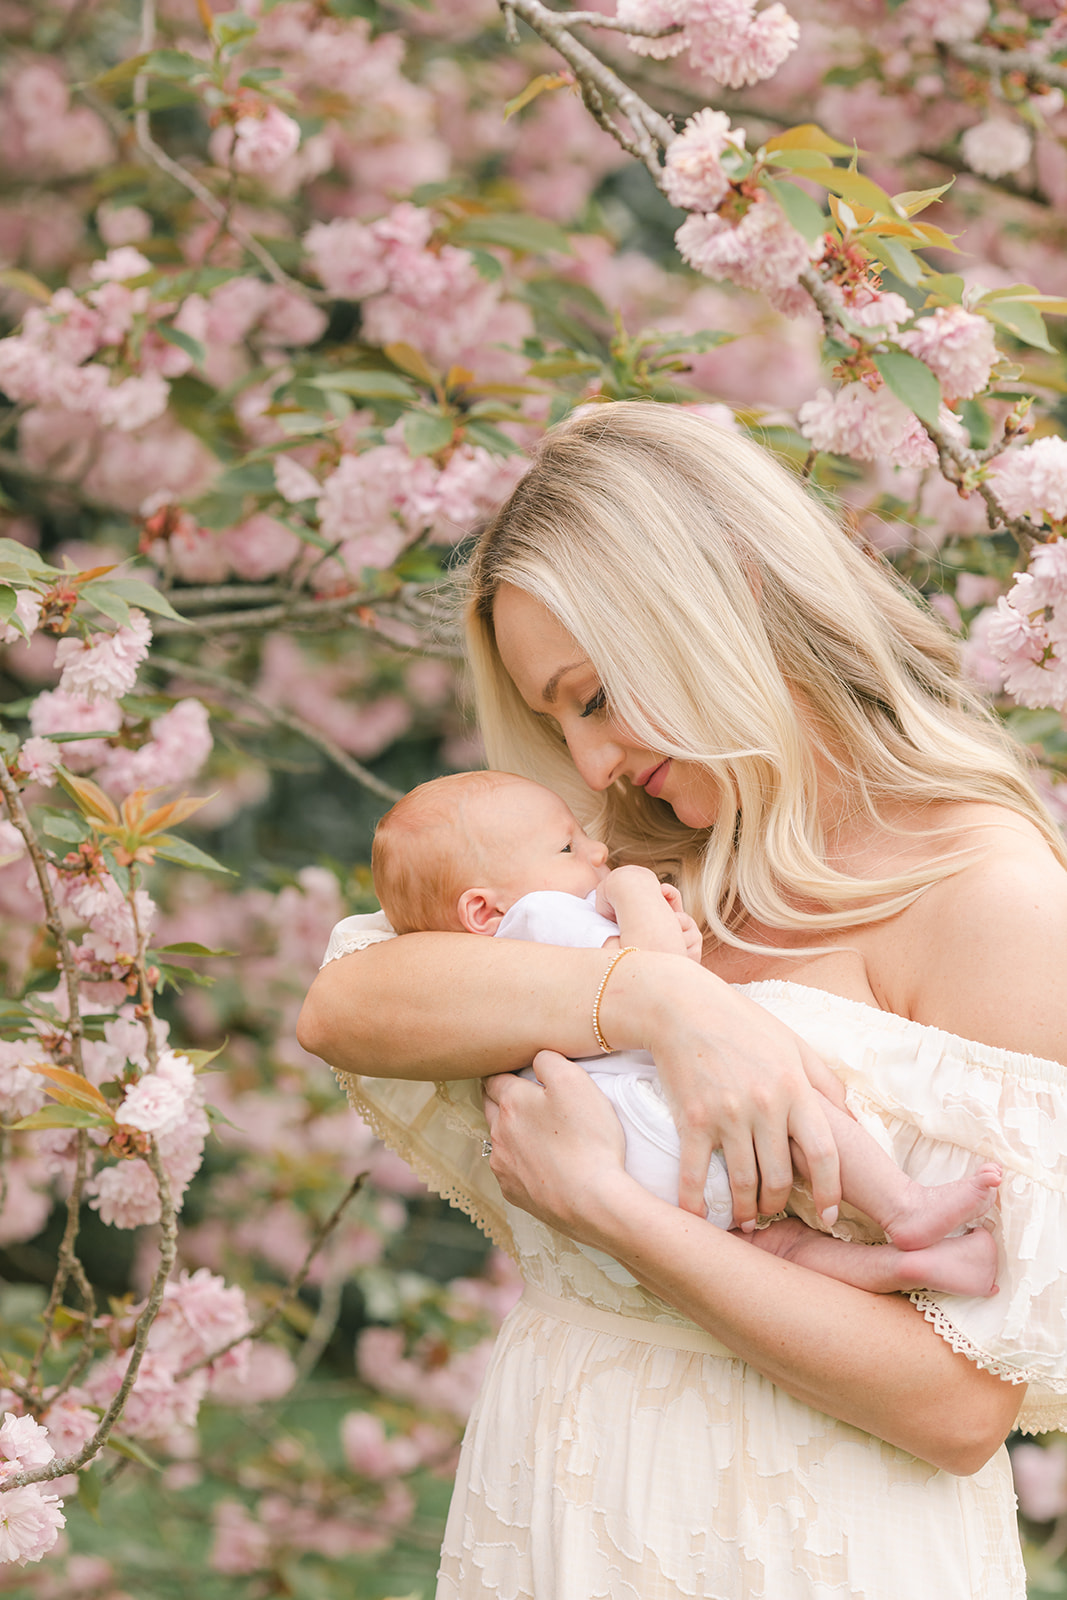 outdoor newborn baby session in nashville tennessee. mom and baby boy